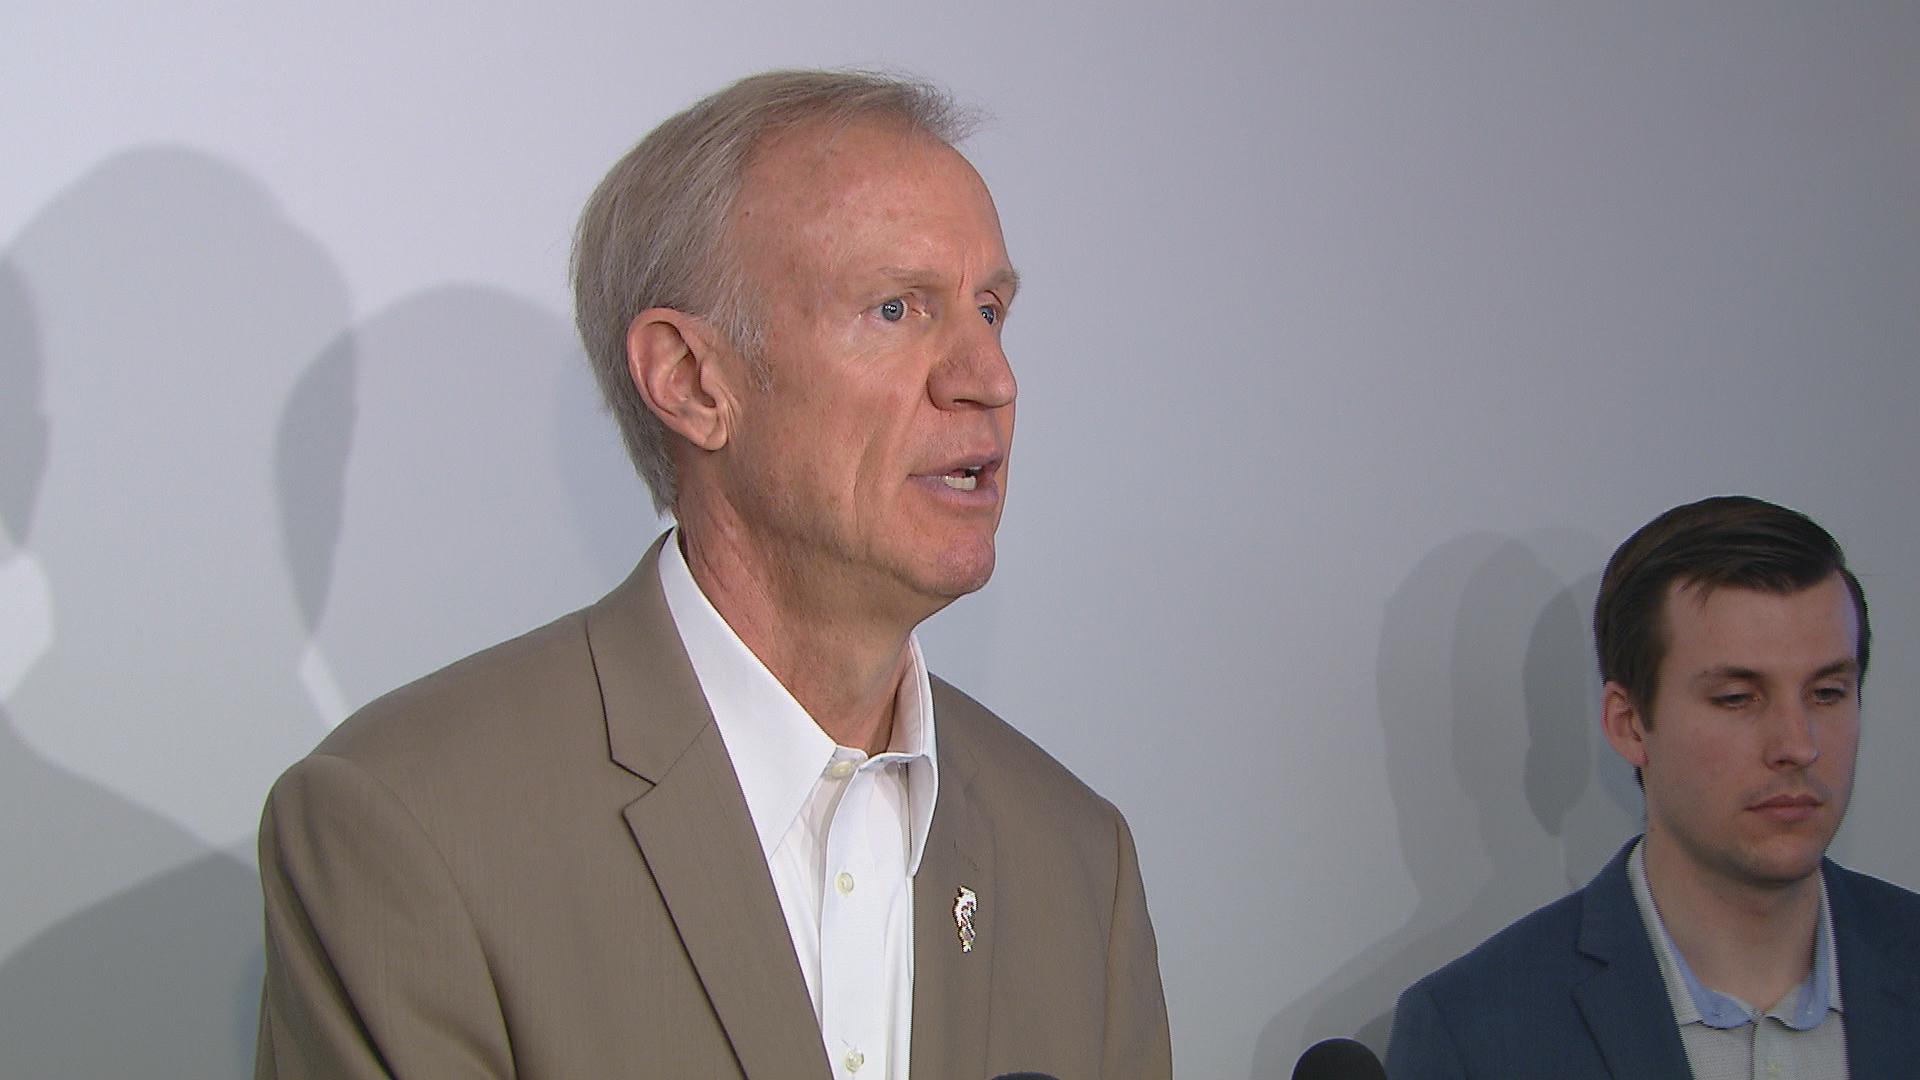 “In private, the president and the mayor are very supportive of our reforms,” said Gov. Bruce Rauner on Monday.